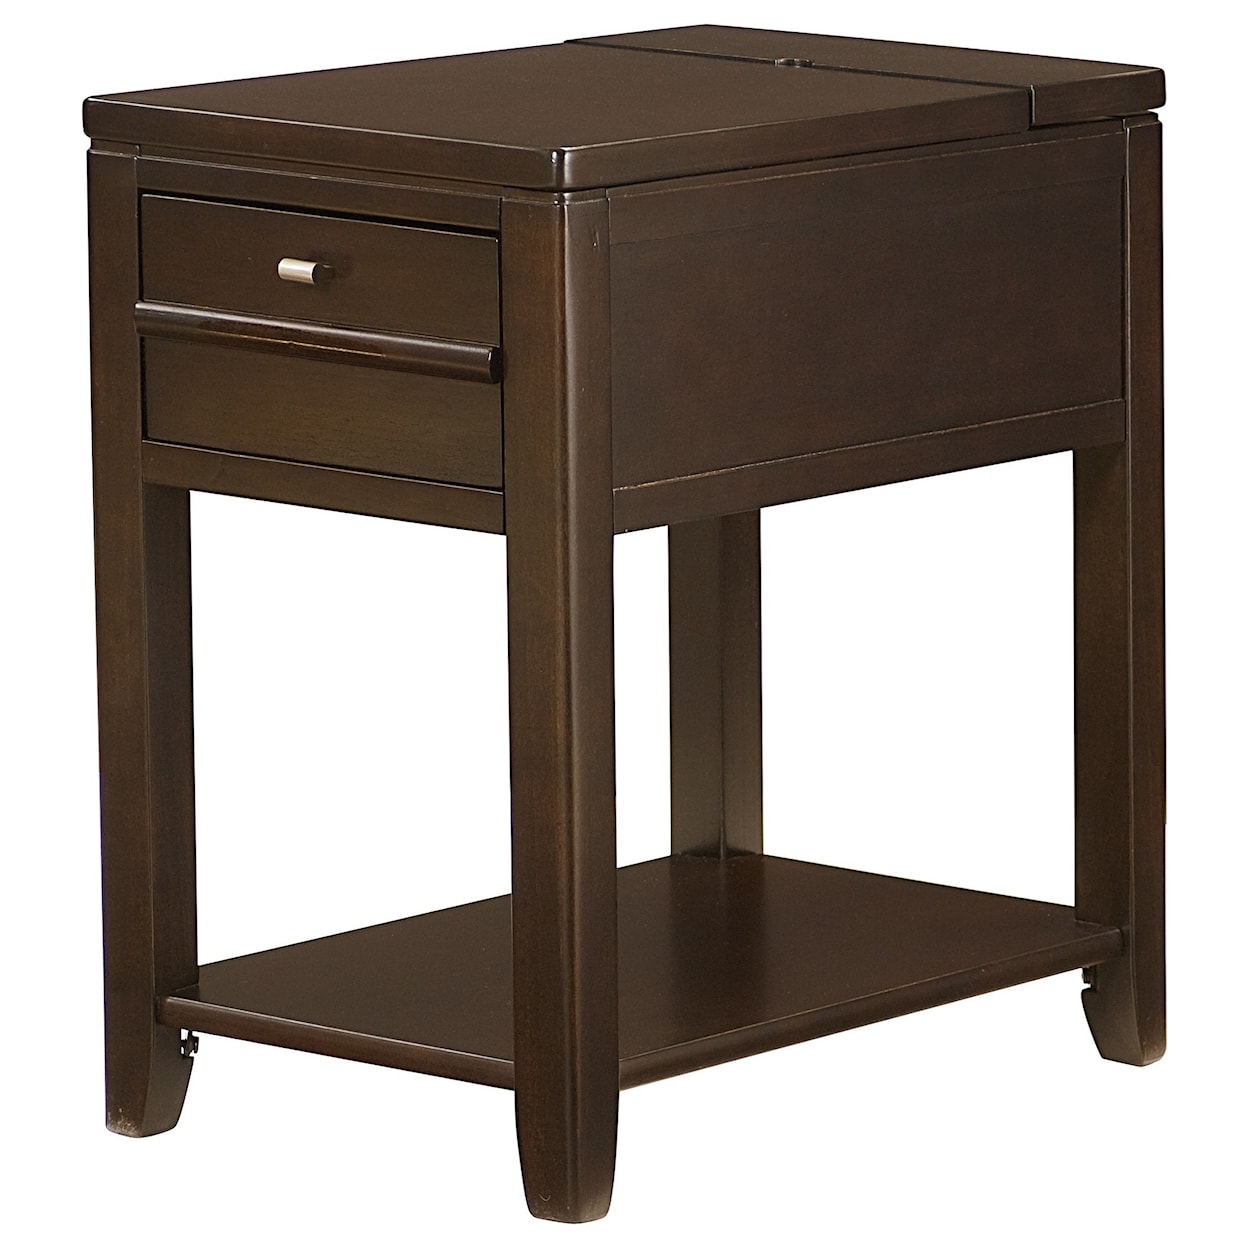 Hammary Chairsides Downtown Chairside Table